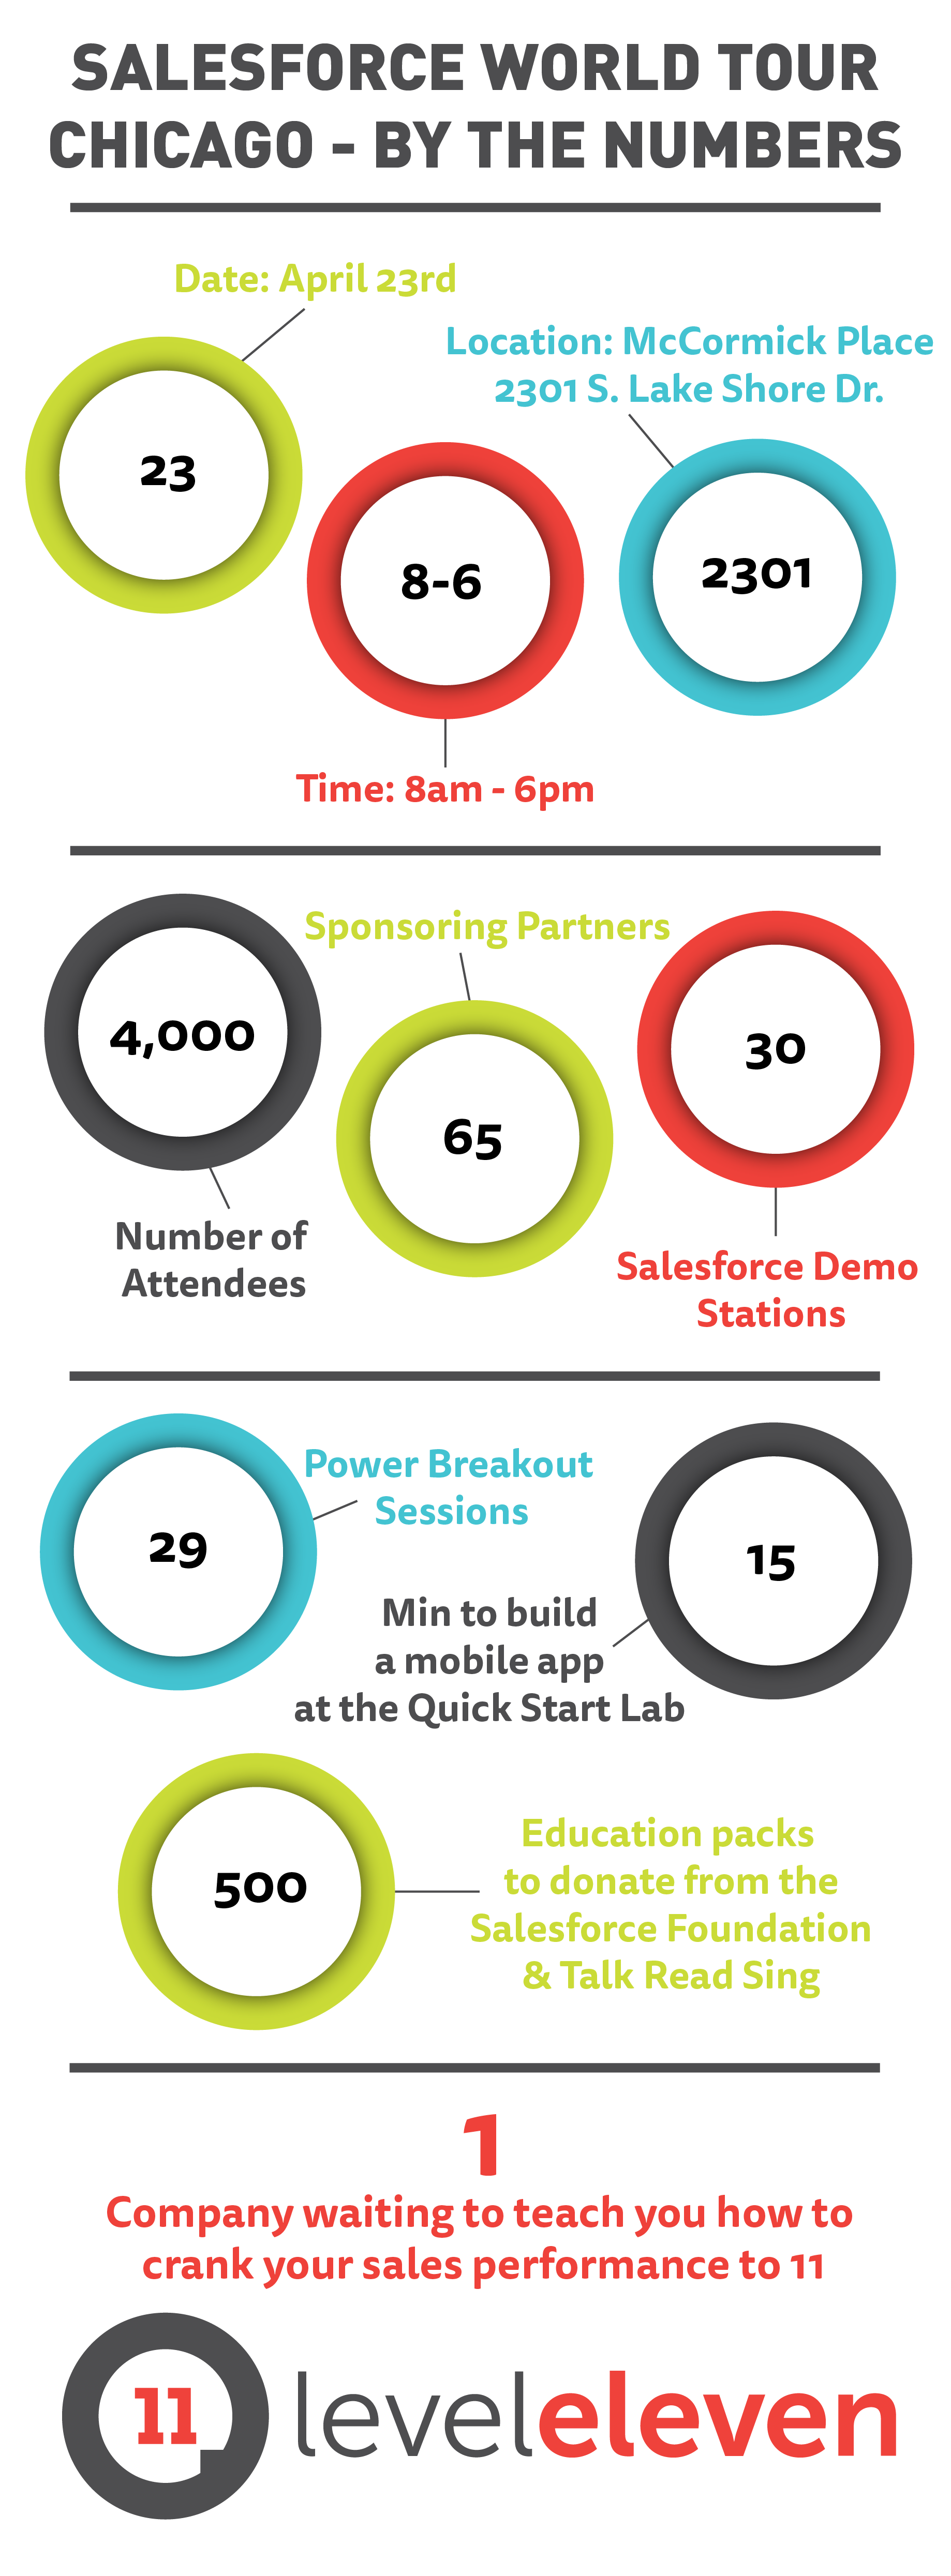 Salesforce World Tour Chicago by the Numbers [Infographic]